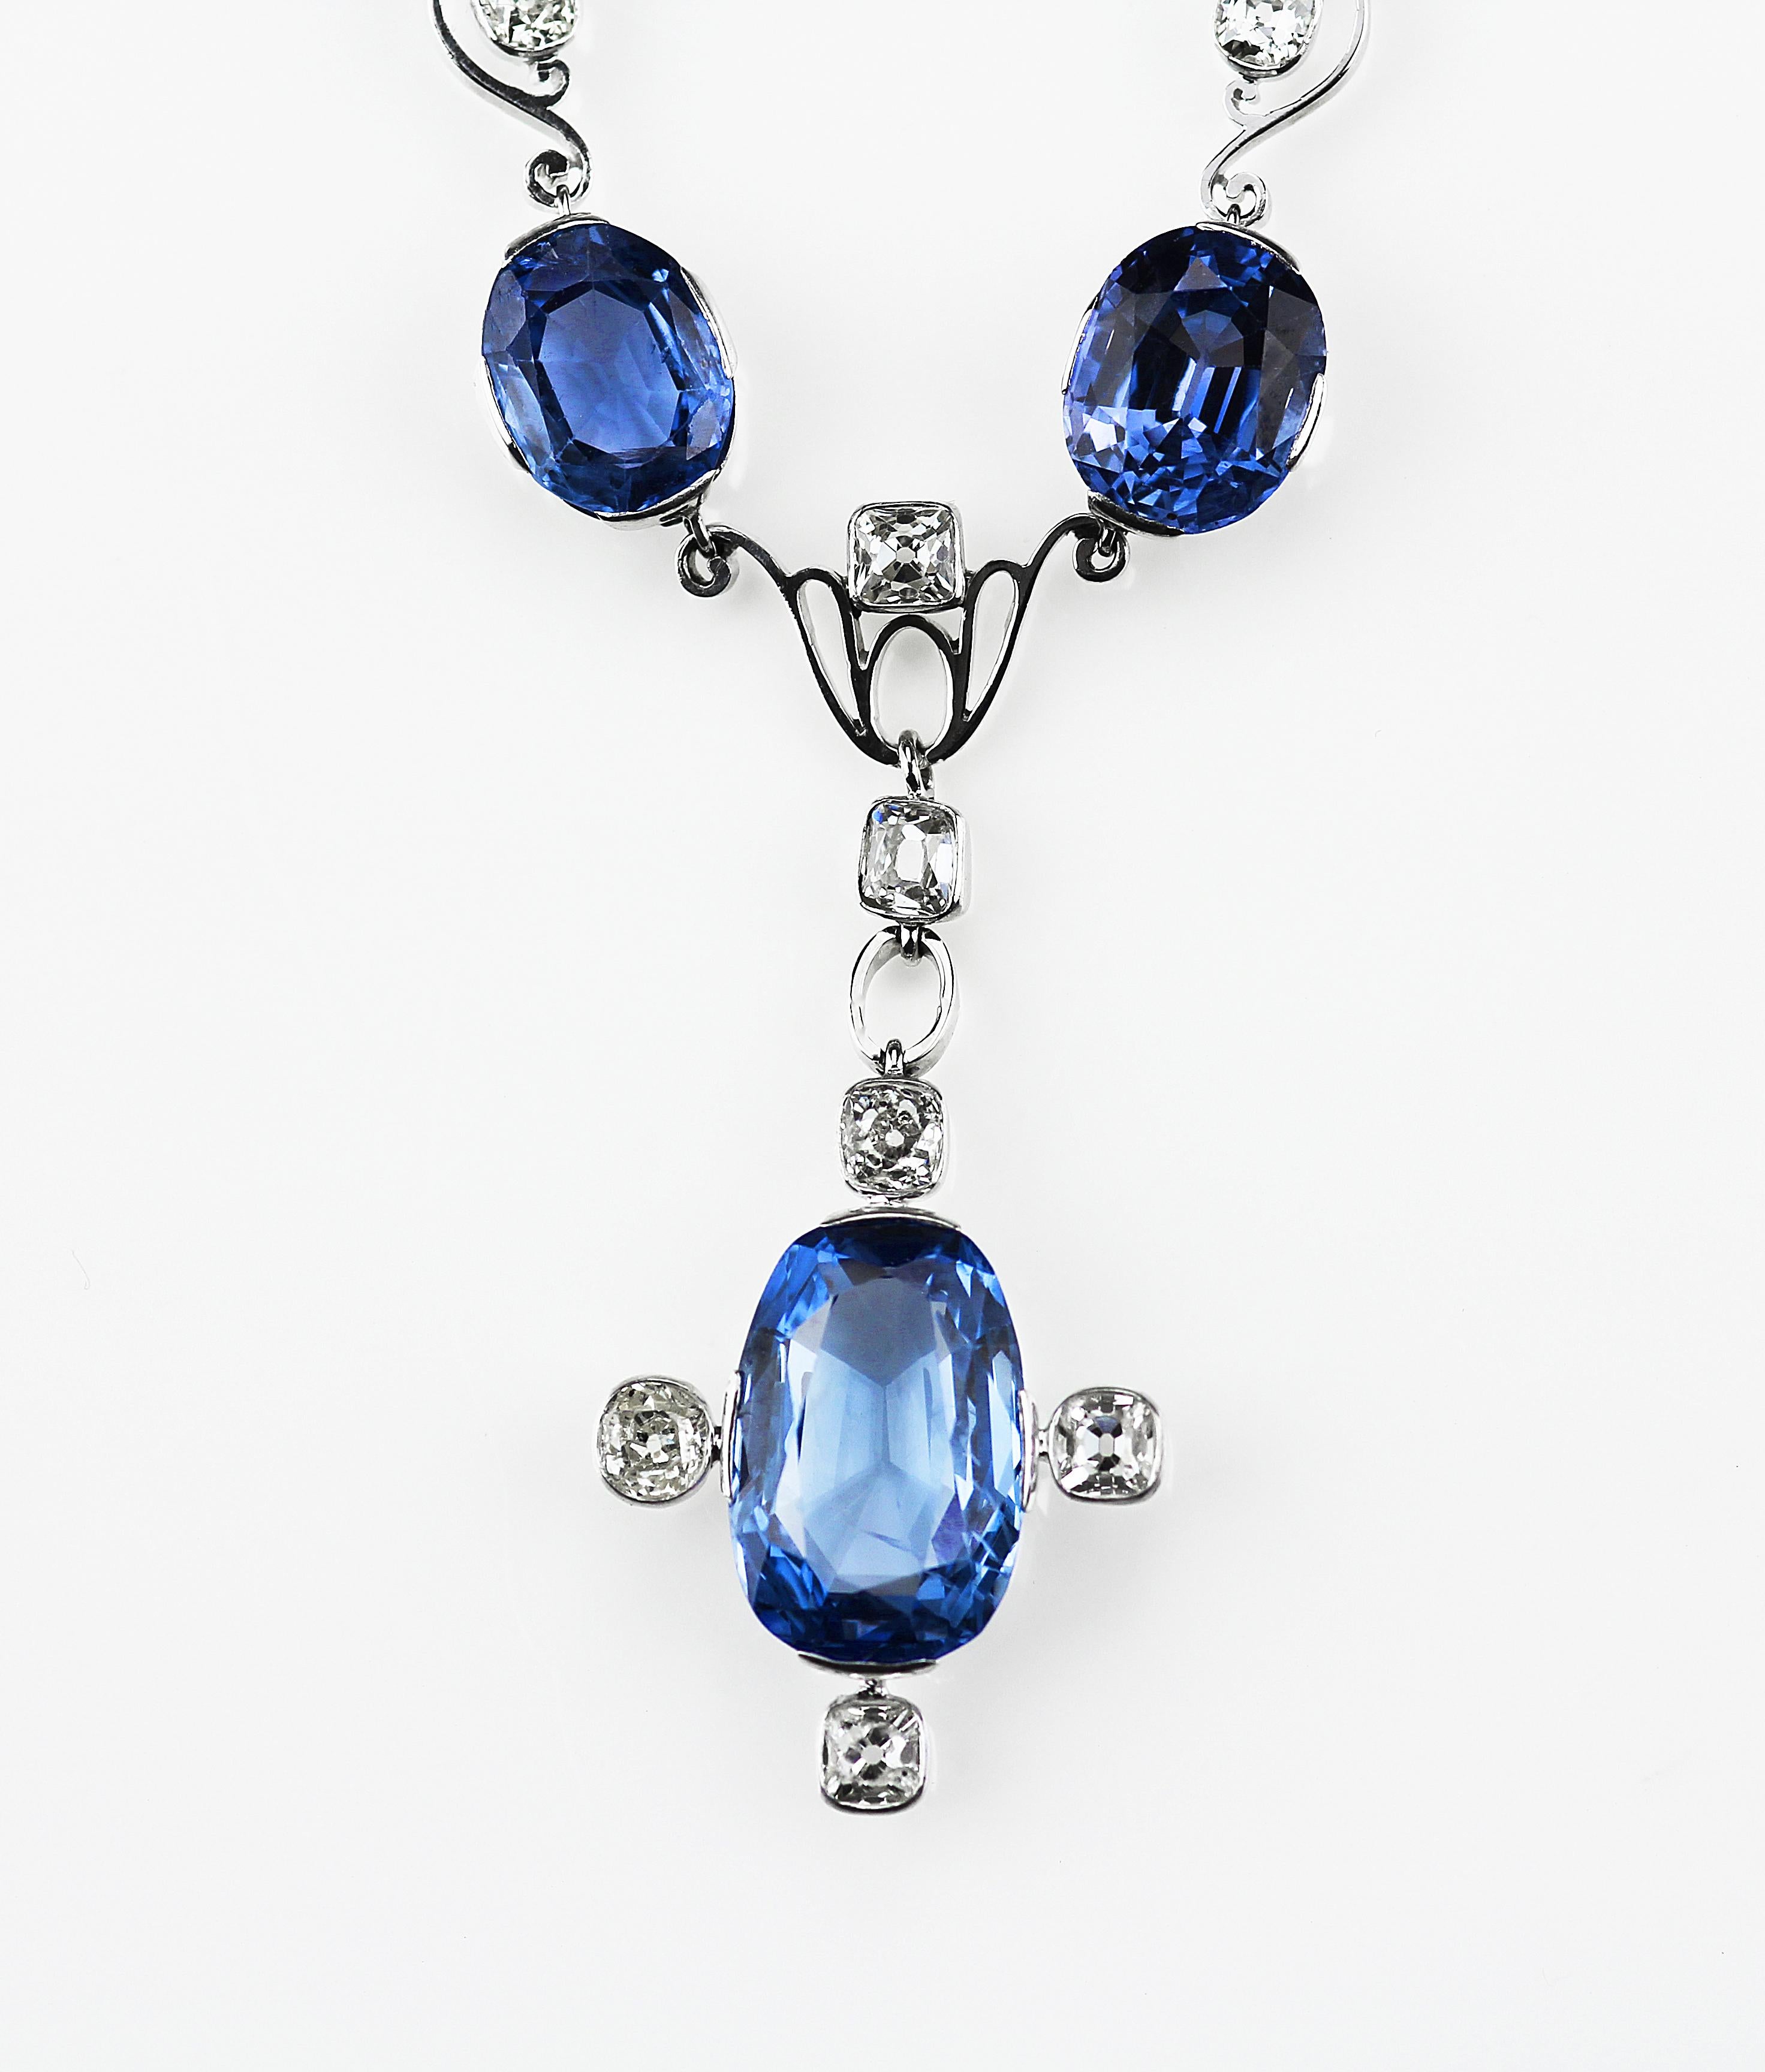 Antique Edwardian, circa 1900, sapphire and diamond necklace consisting of a drop pendant set in platinum. The necklace is flexible and gracefully draping down to your chest. Could also be worn as a head piece for special occasions. 
7 x Oval shape